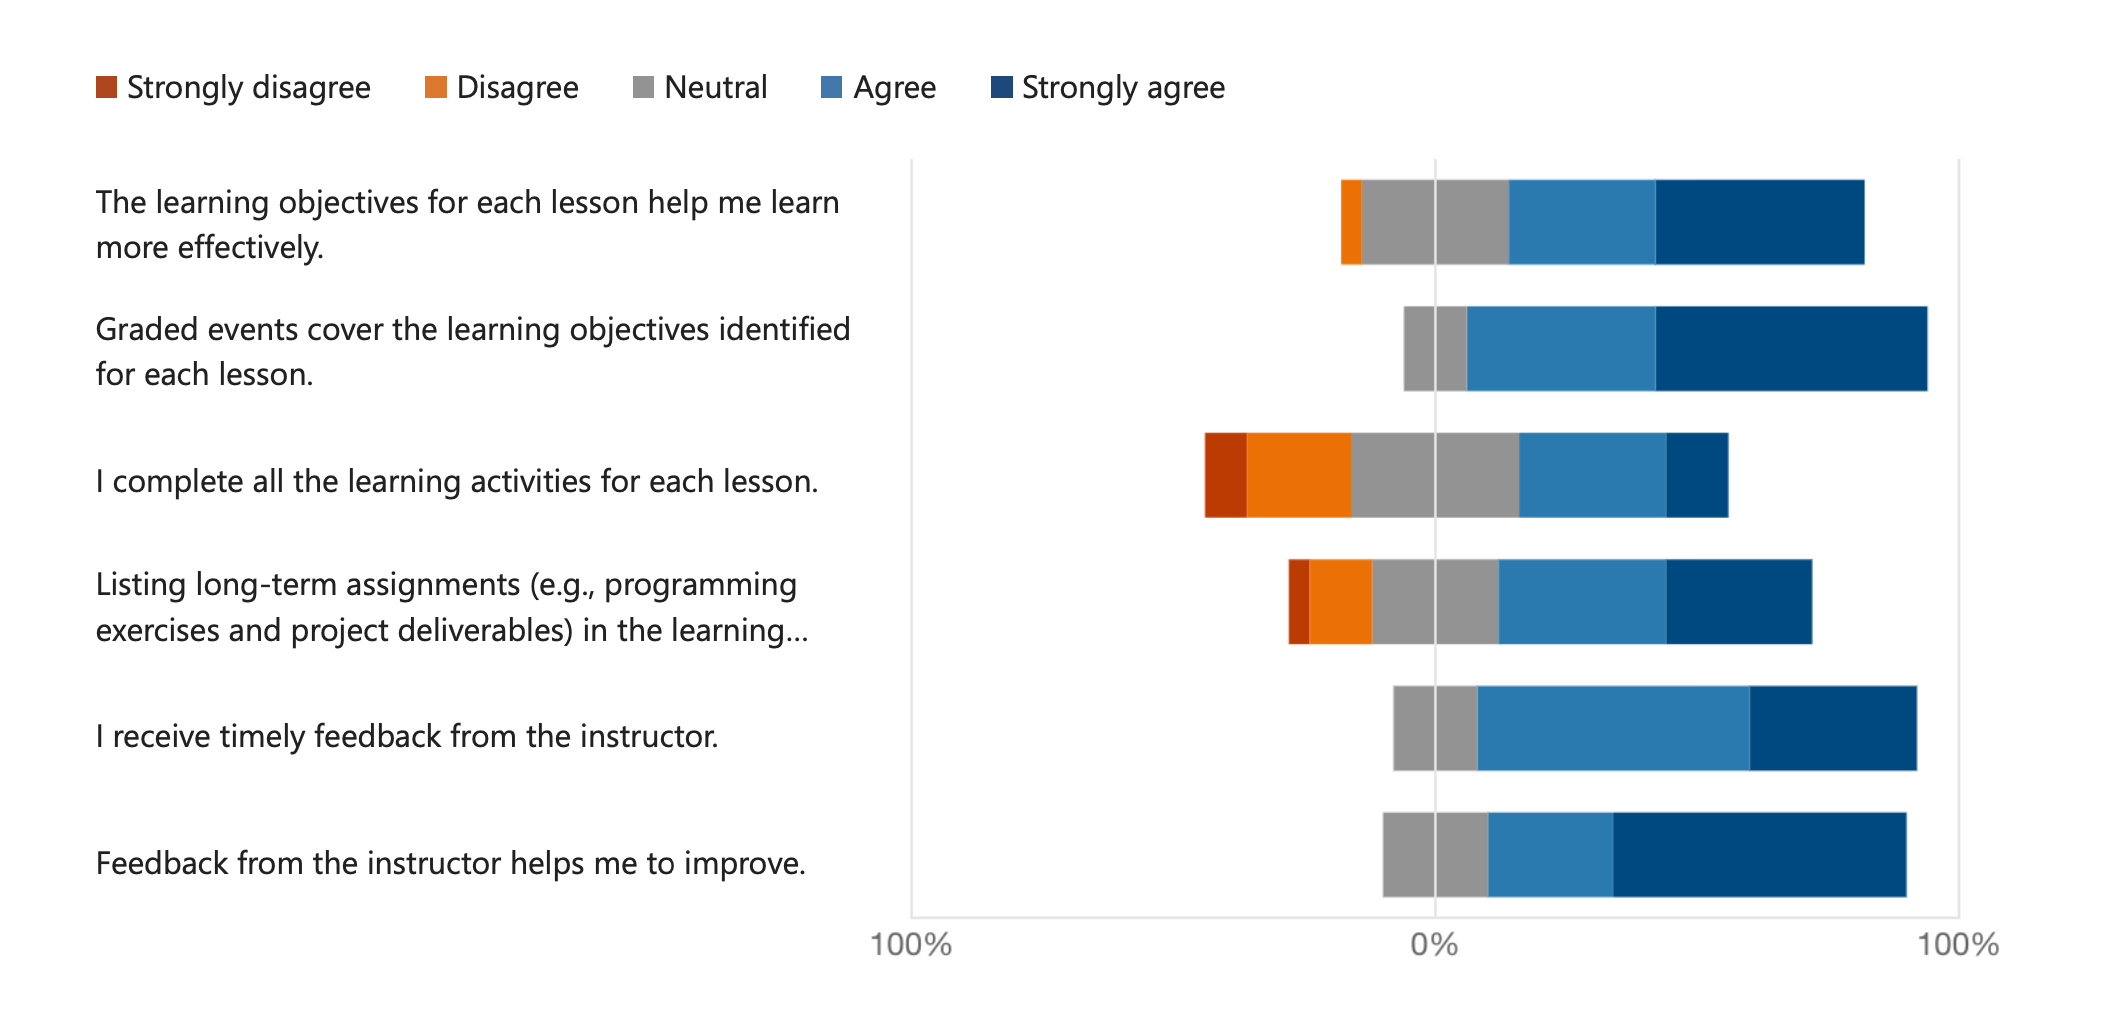 responses to Likert-scale questions